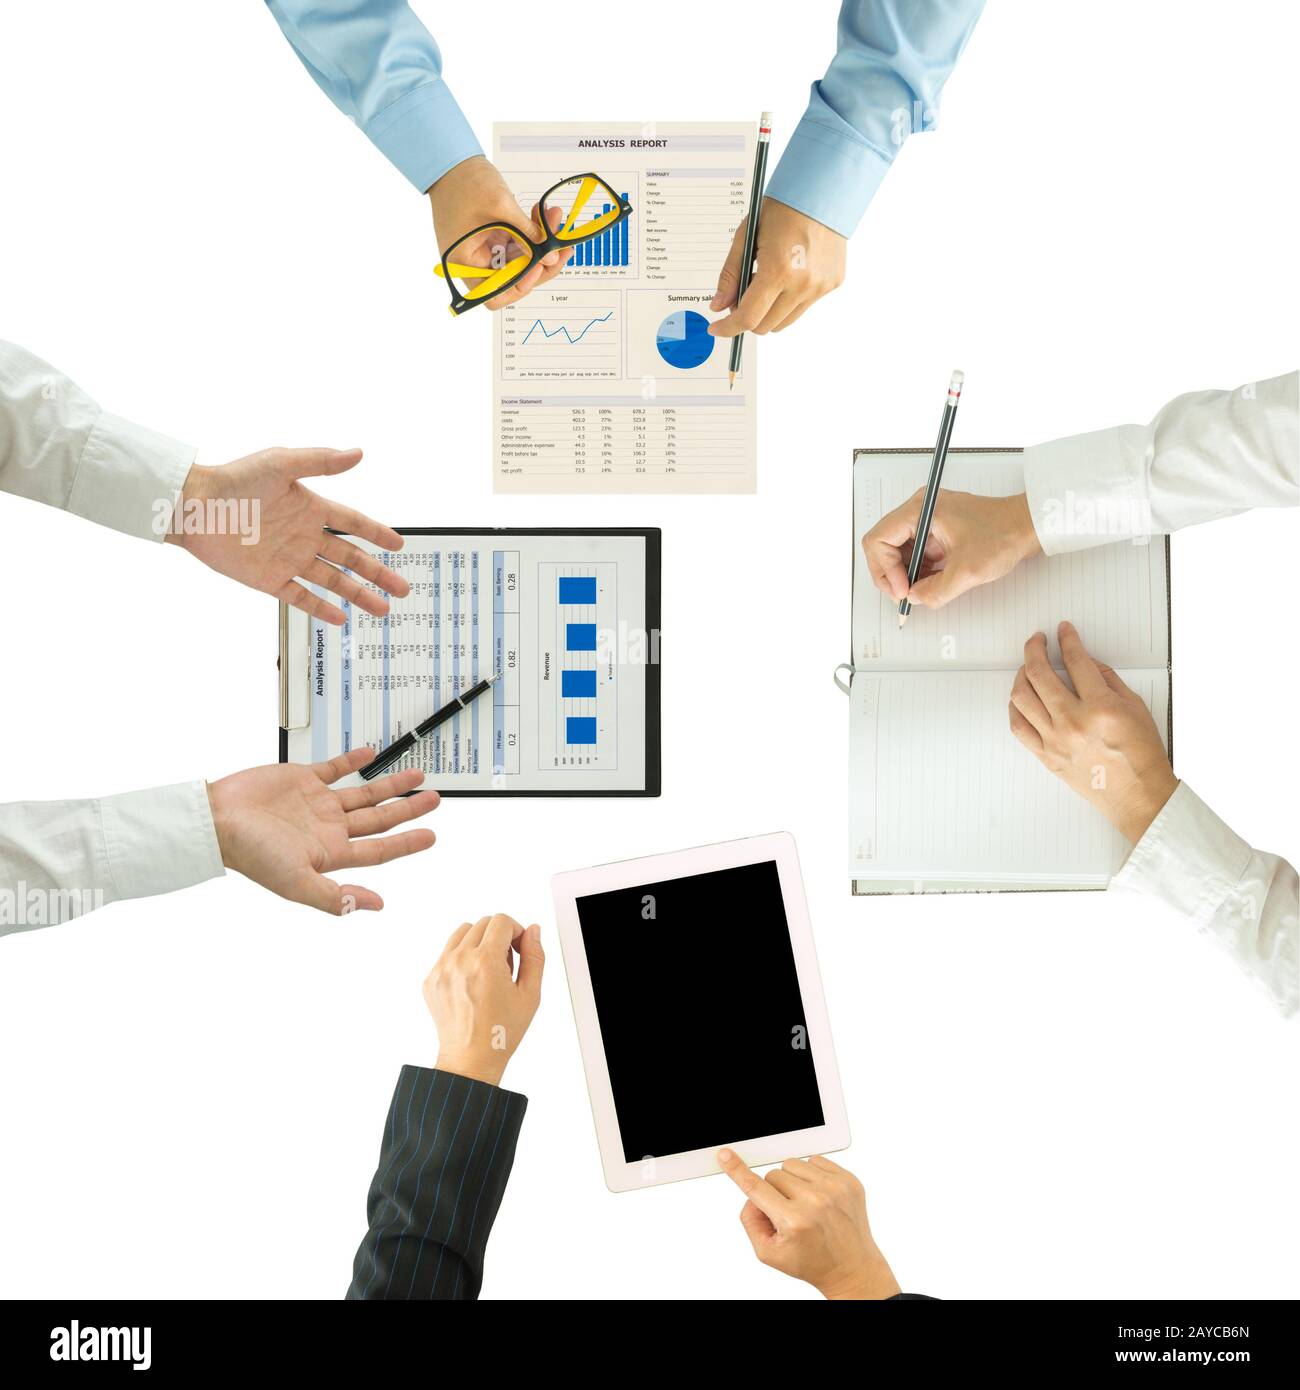 Top view of group of business people working on an office desk. Stock Photo